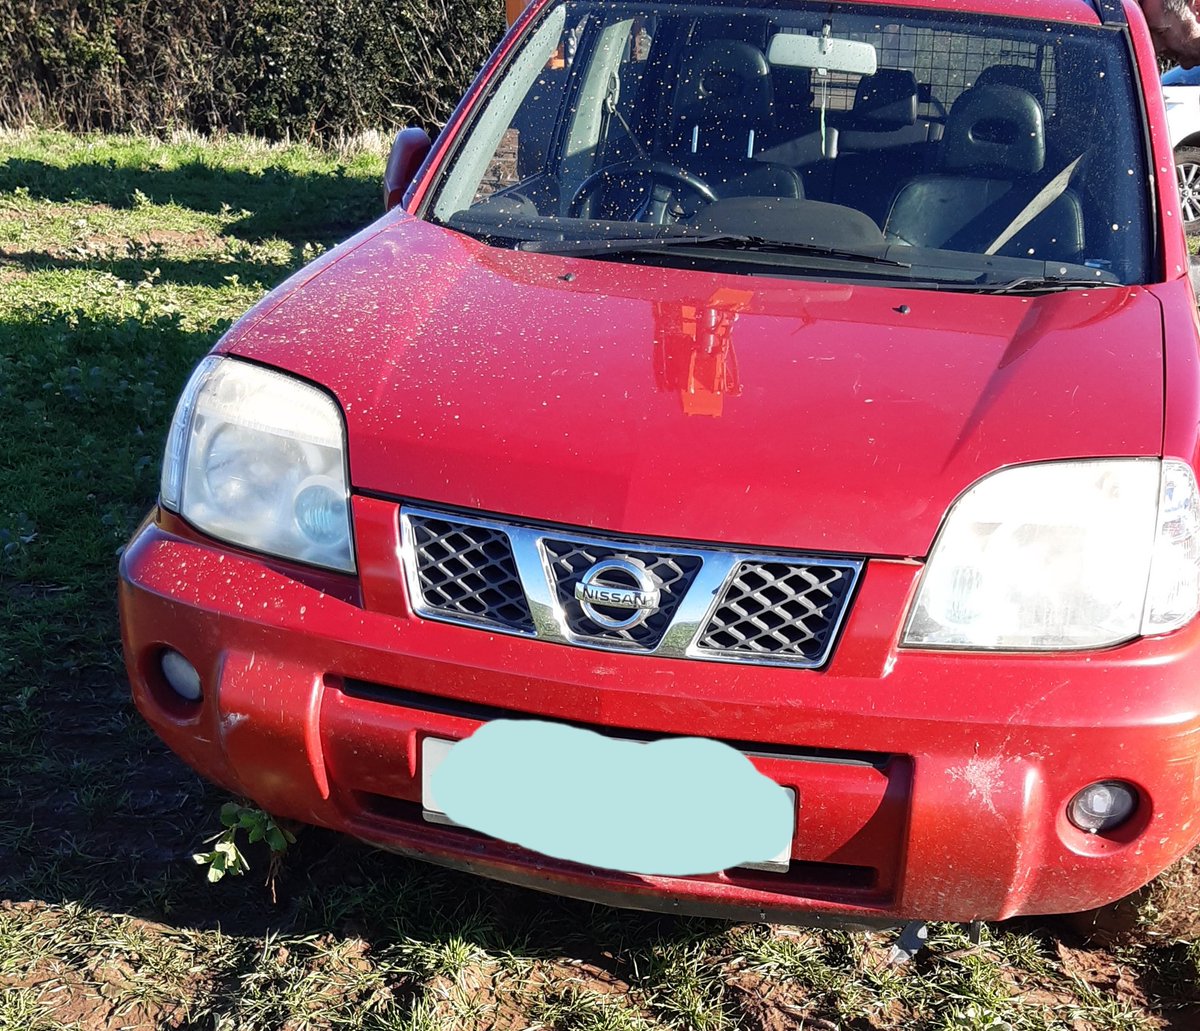 Hereford Rural Crime Team - have recovered this stolen vehicle today. We have also identified other vehicles of interest. As always we are grateful for your support.@Supt_Hancox @CCPippaMills @MrEddWilliams